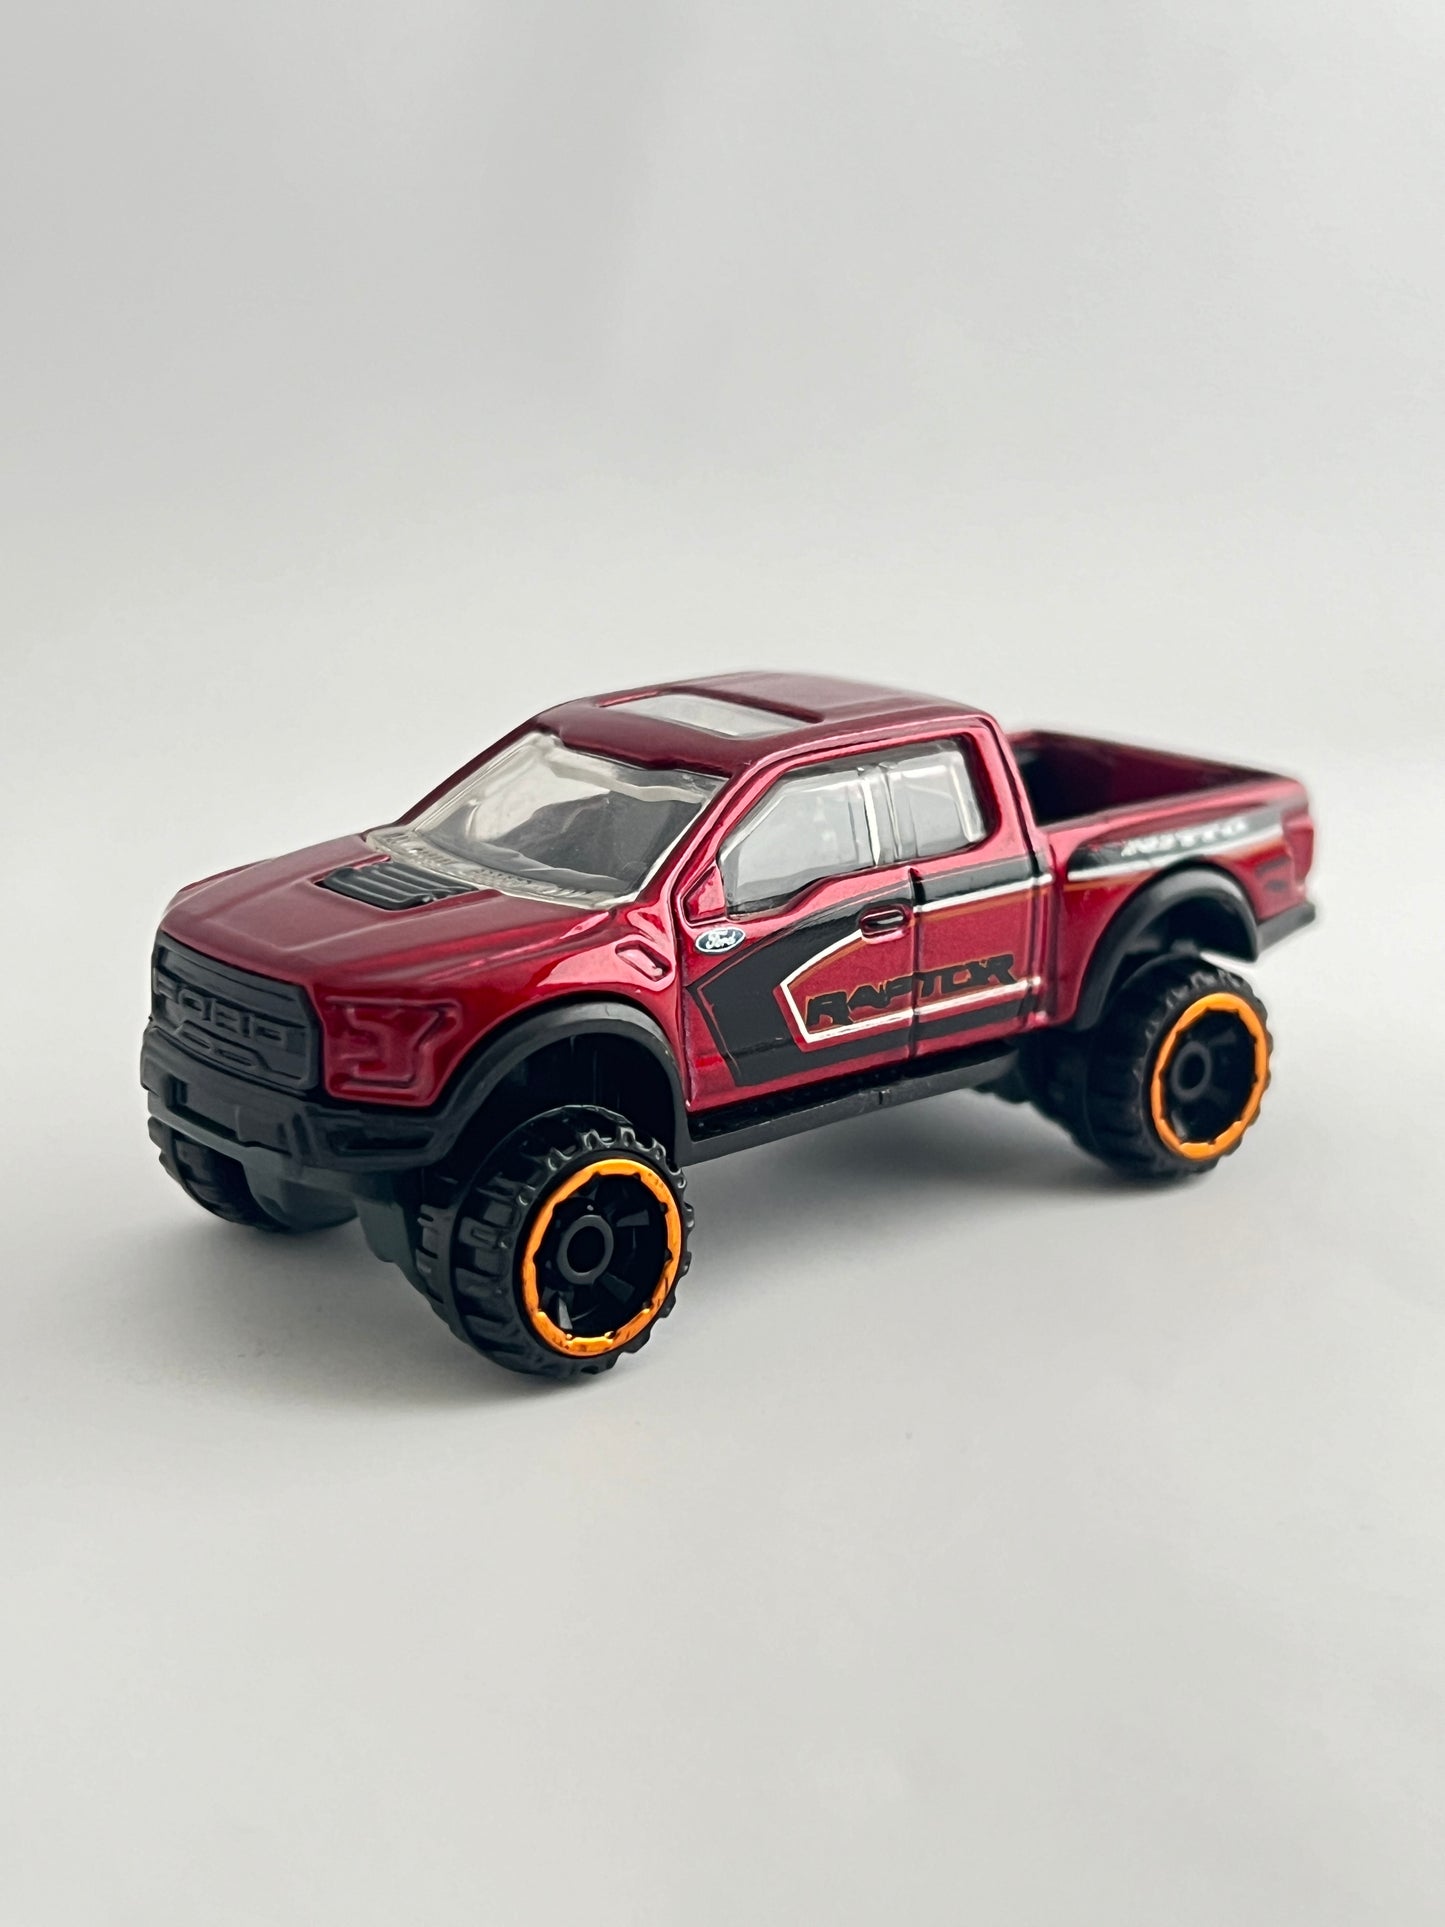 17 FORD F-150 RAPTOR- UNCARDED - MINT CONDITION